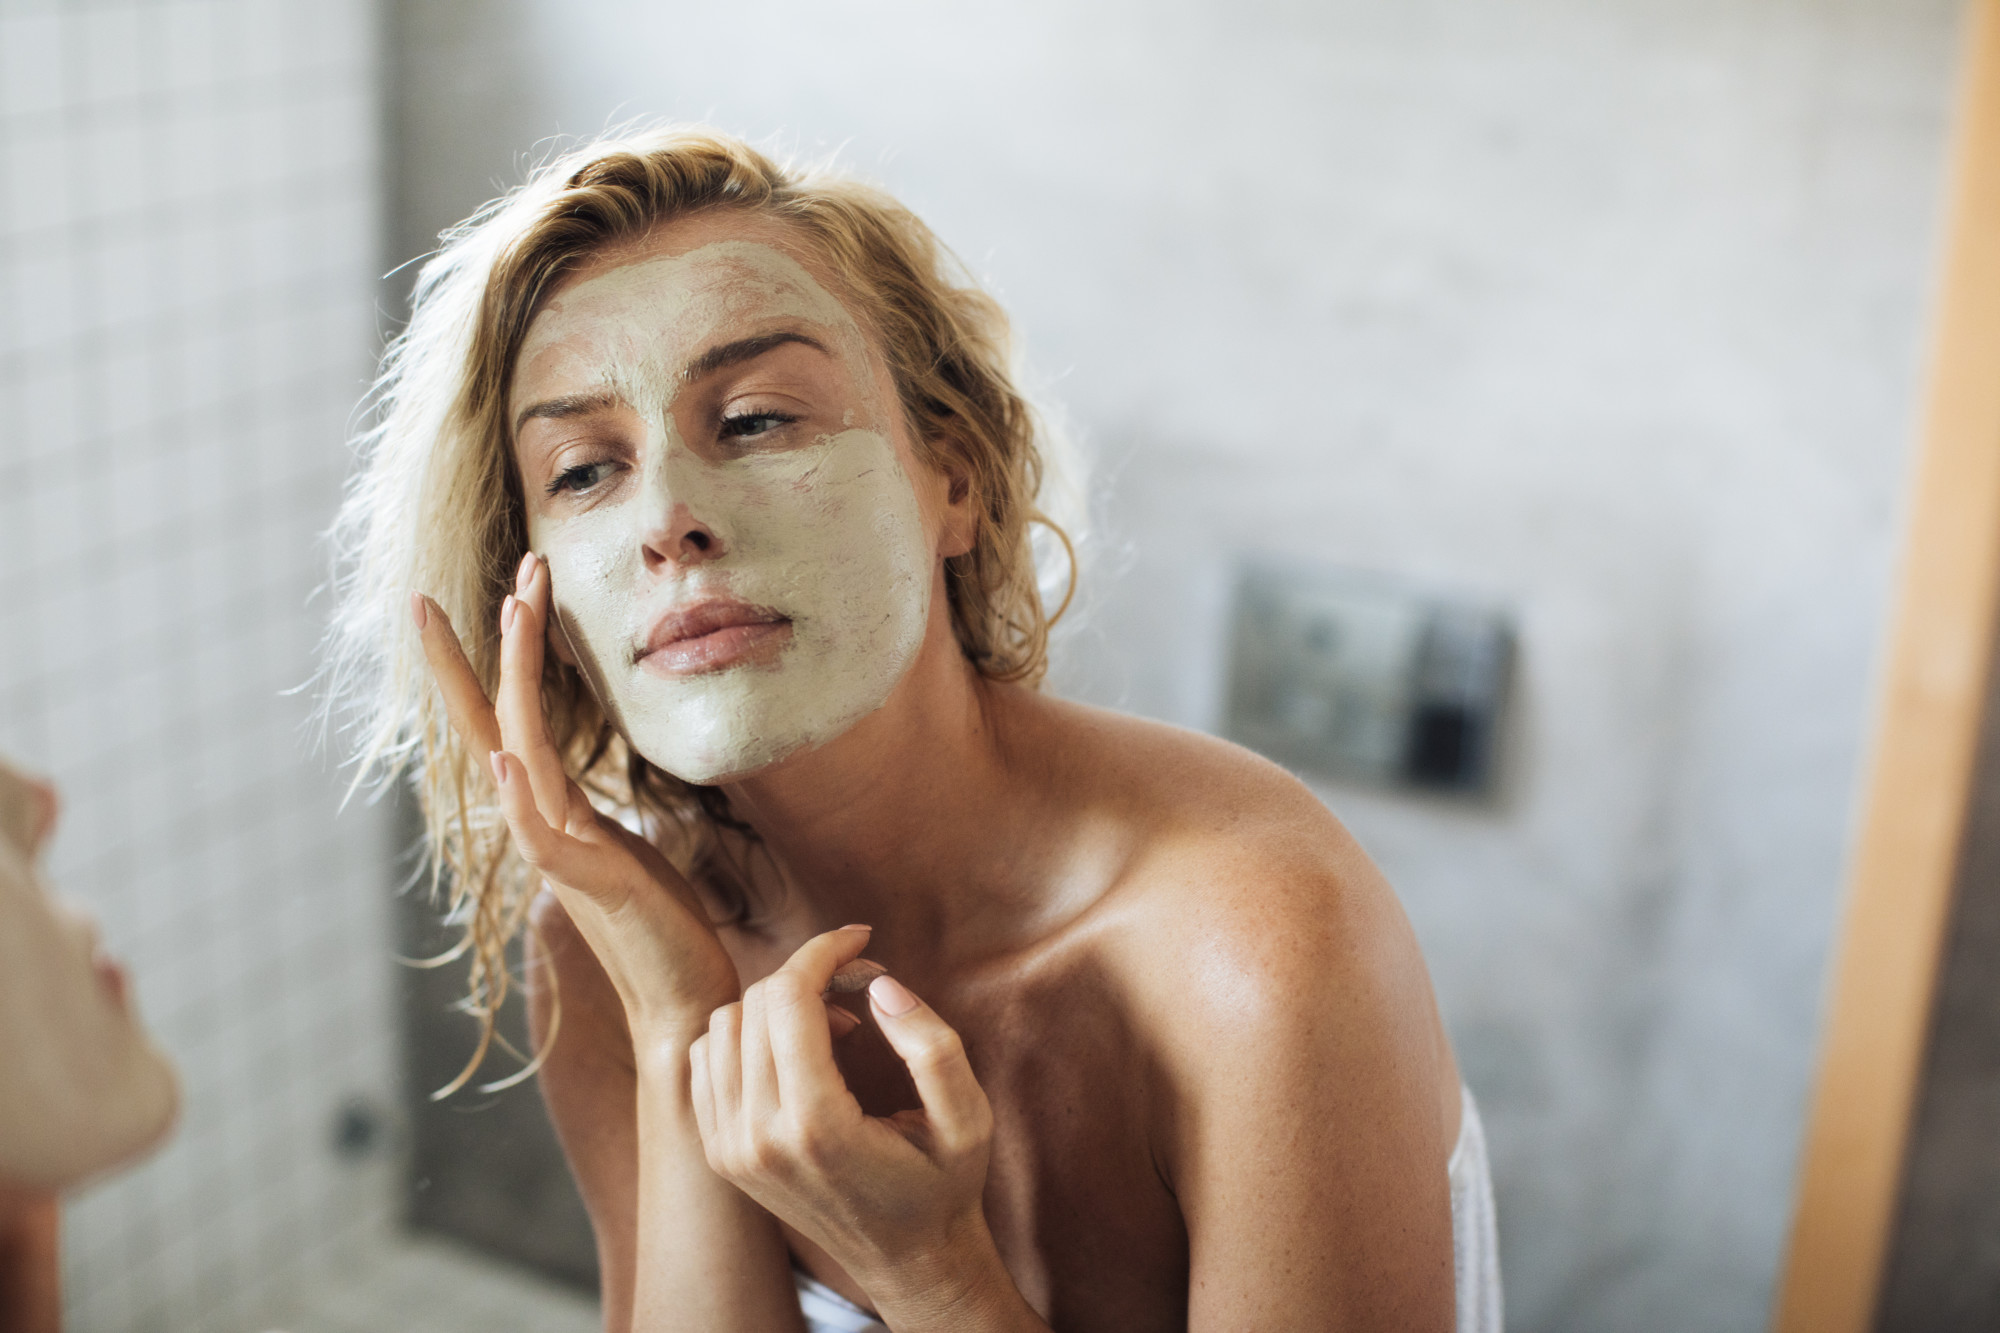 How to Build a Daily Skin Care Routine That Works for You